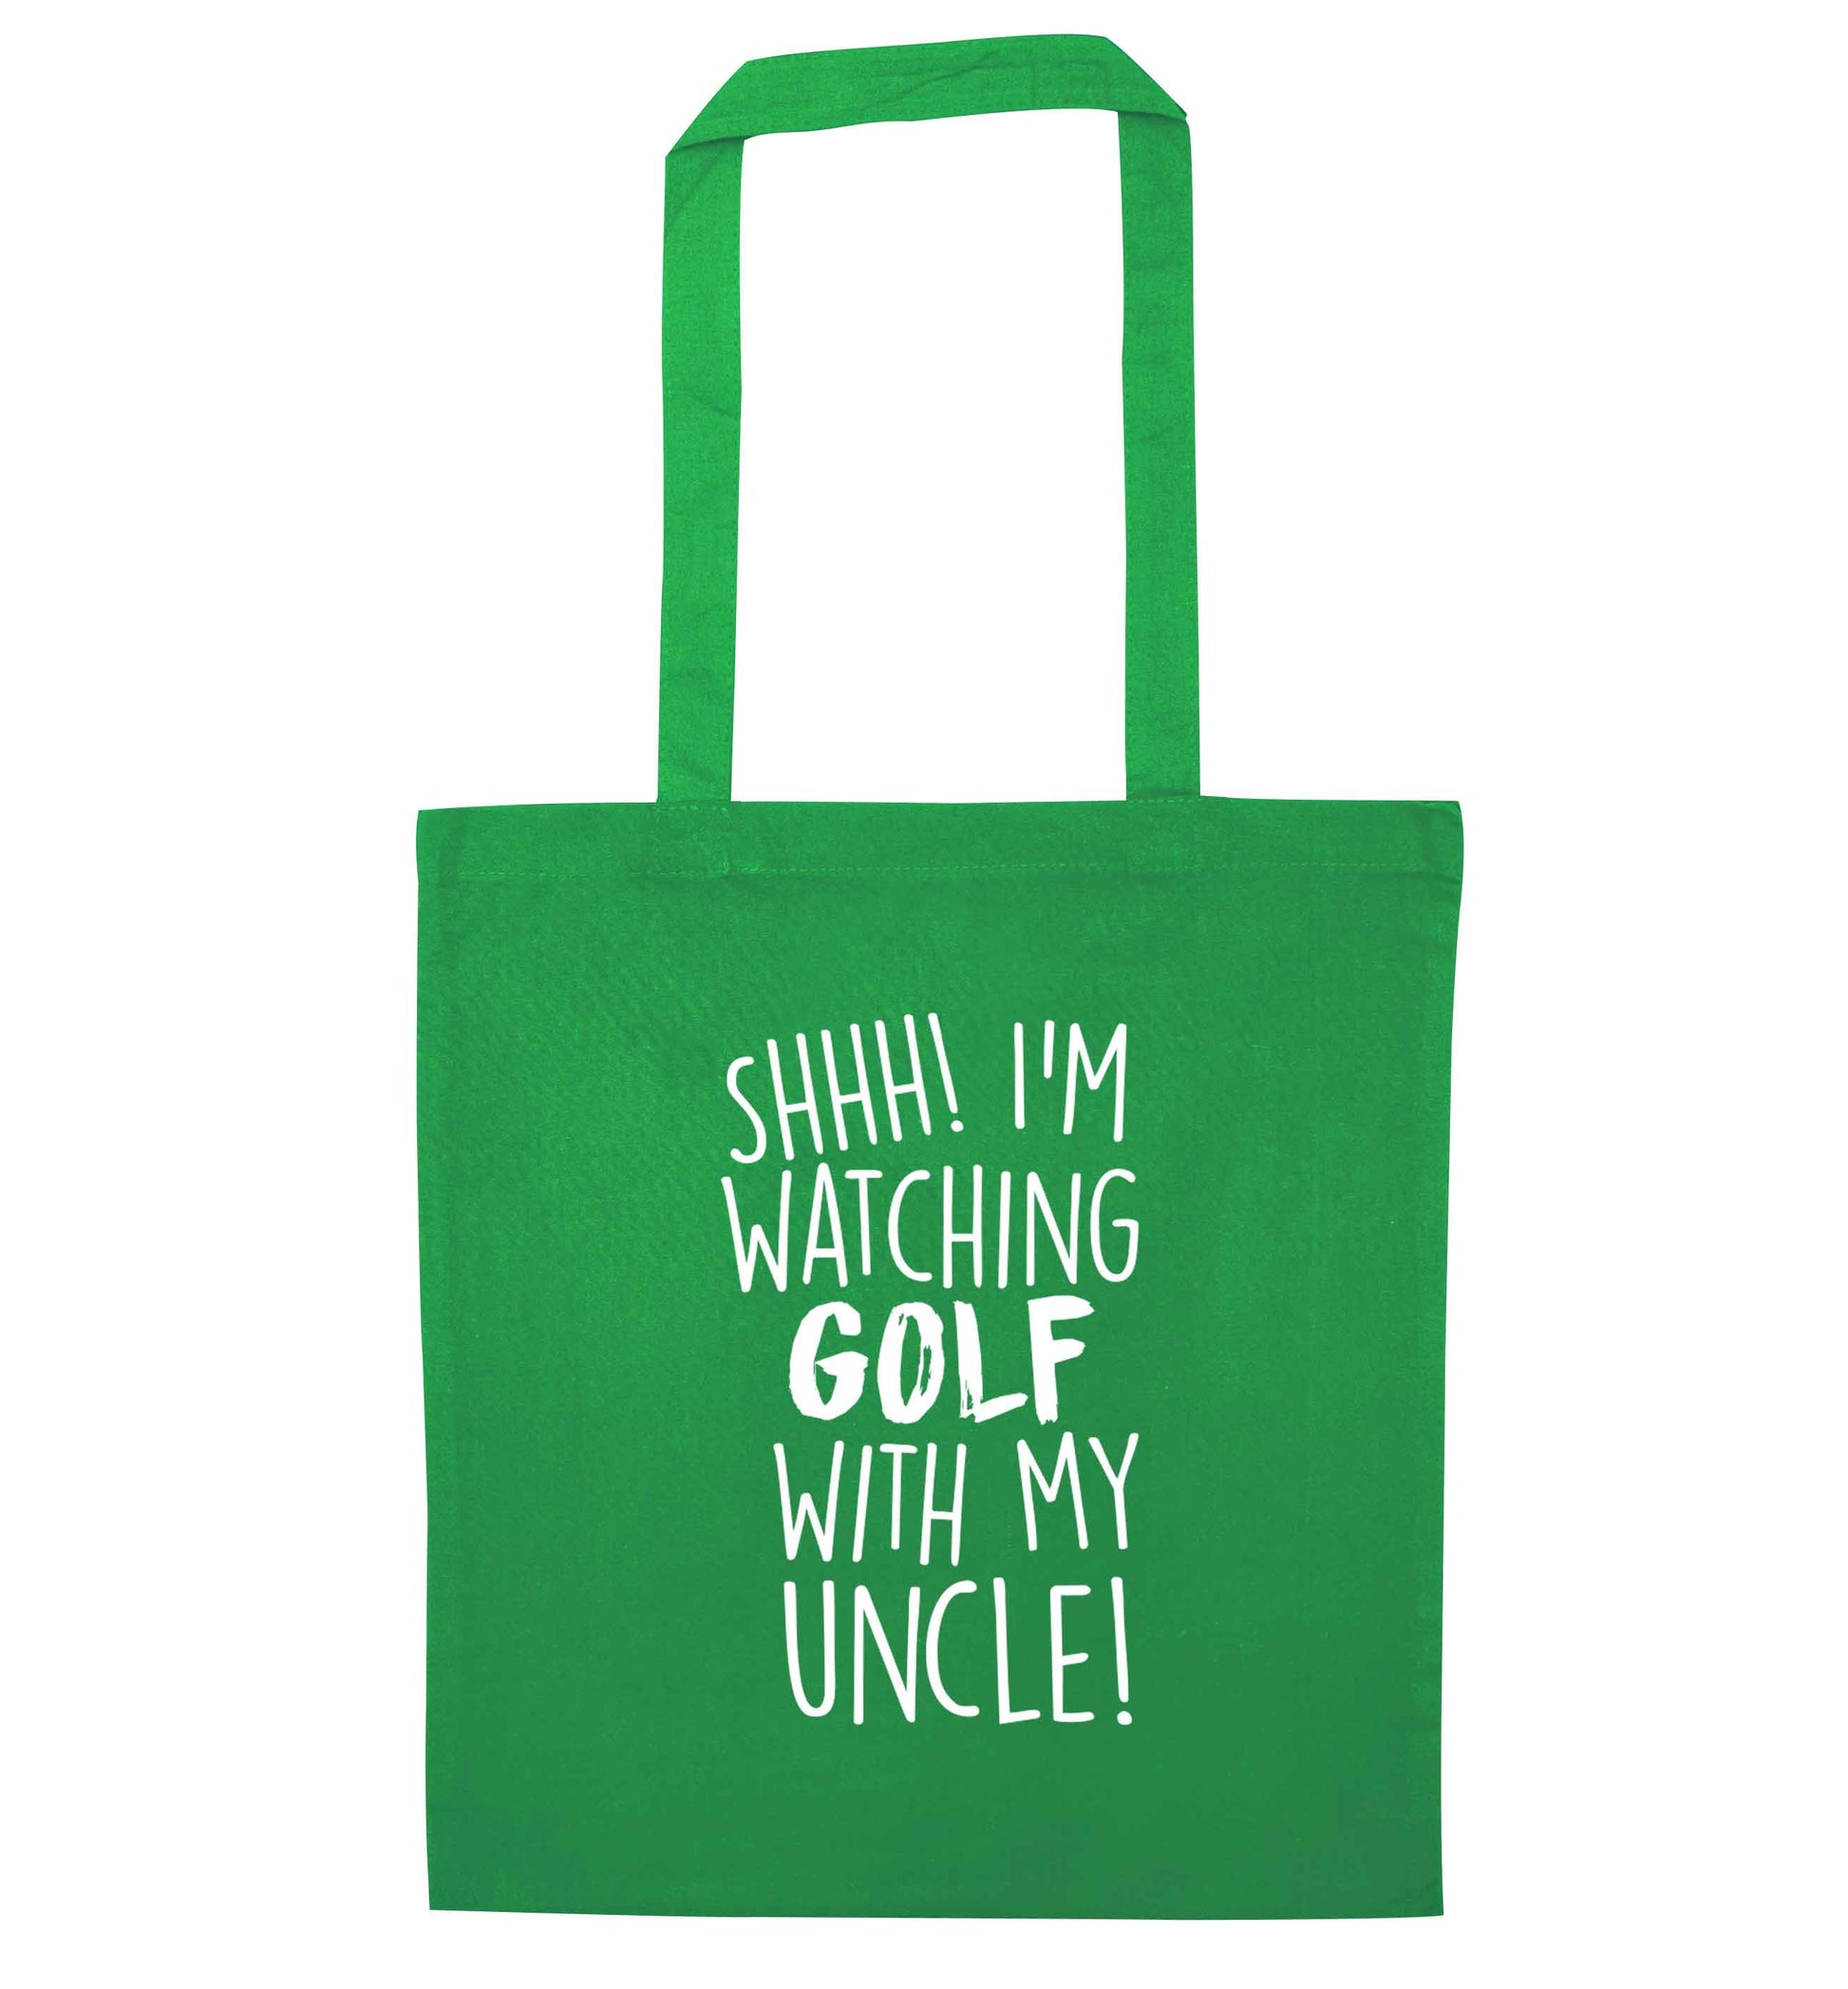 Shh I'm watching golf with my uncle green tote bag